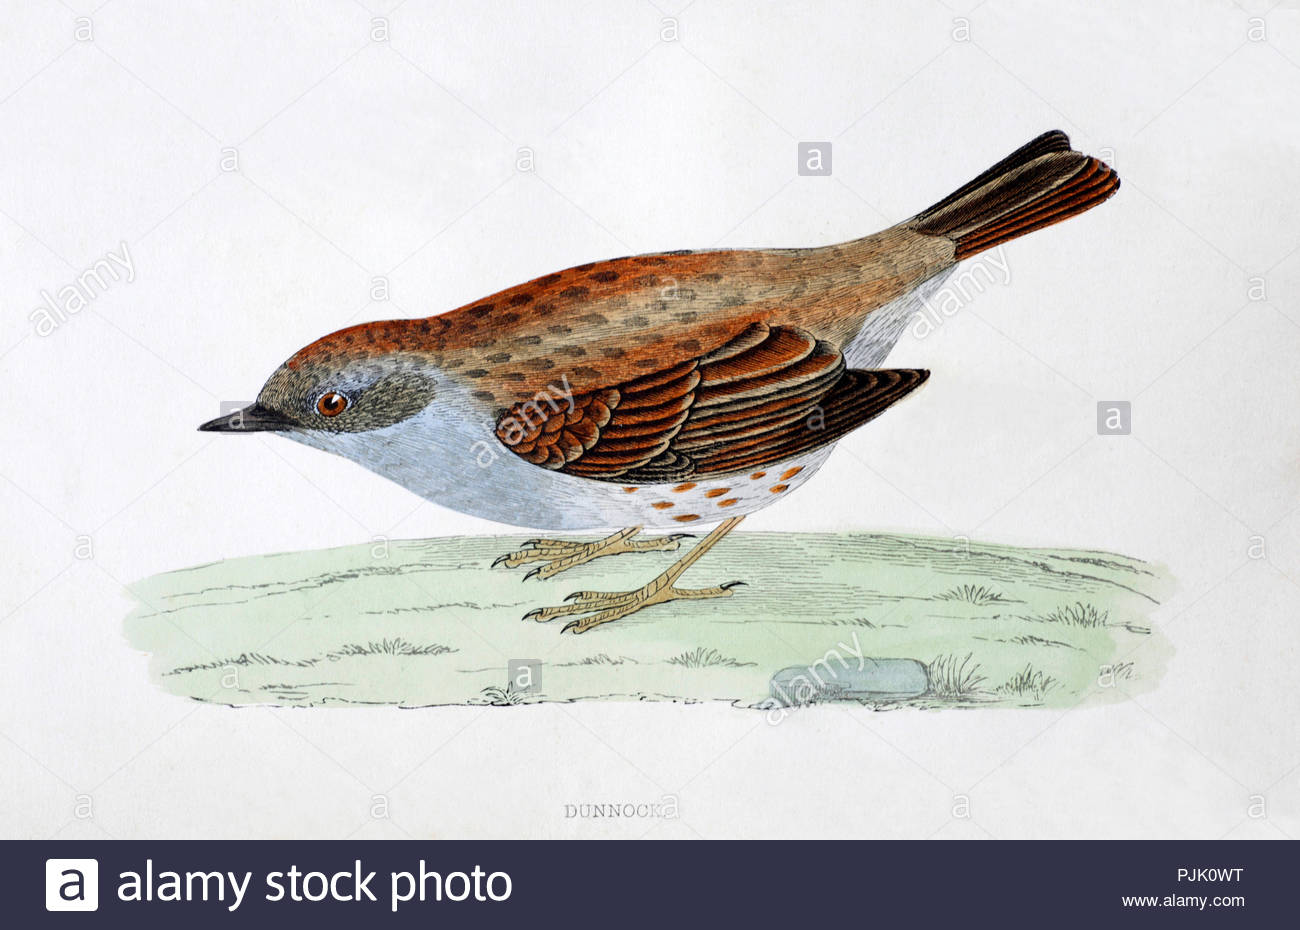 Dunnock (Prunella modularis) vintage illustration, from A History of British Birds by Rev. Francis Orpen Morris, published in c1850 Stock Photo